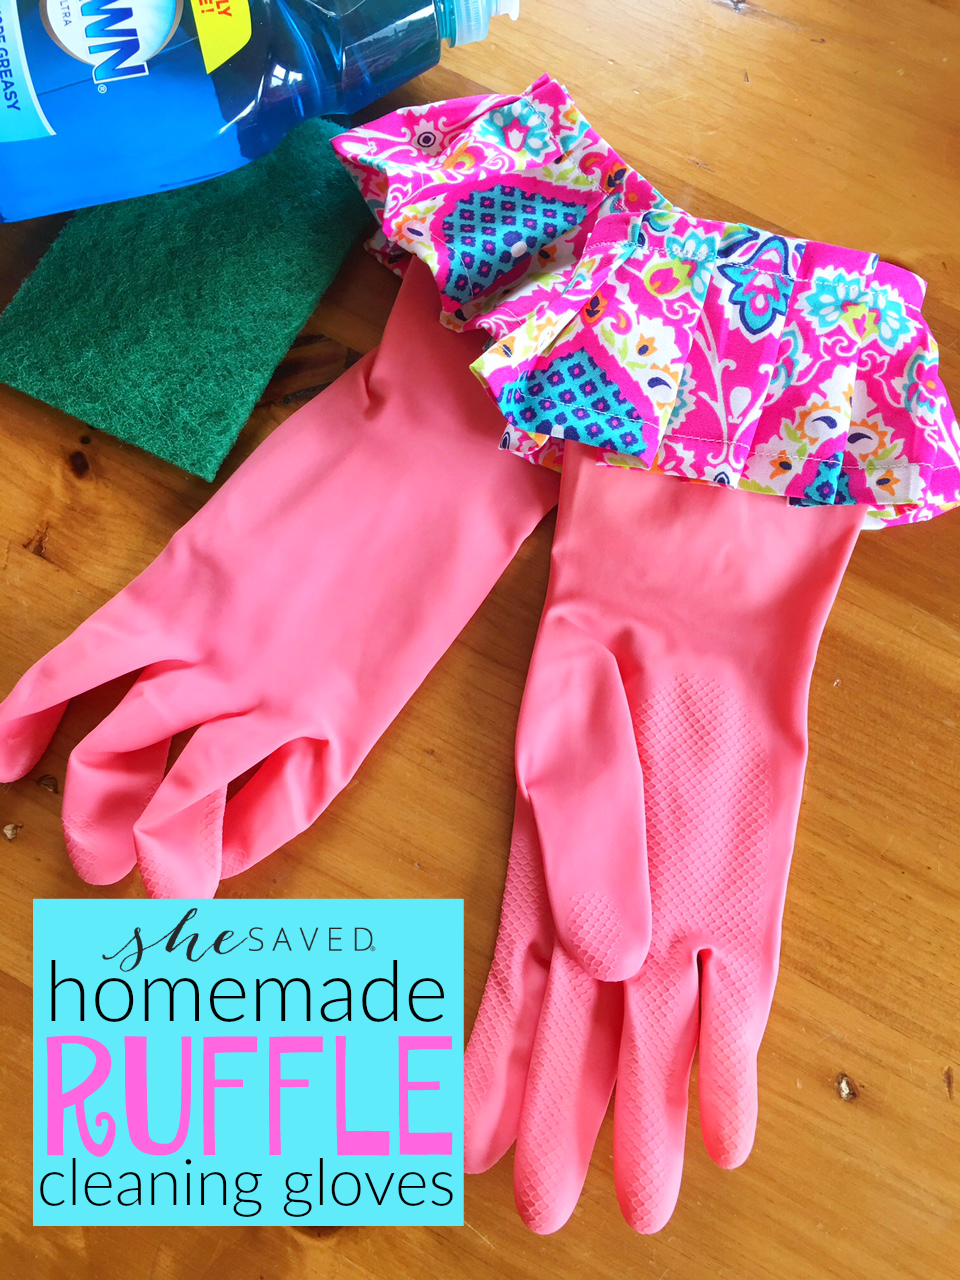 Make these fun Homemade Ruffle Cleaning Gloves for a Mother's Day gift or a fun craft project!